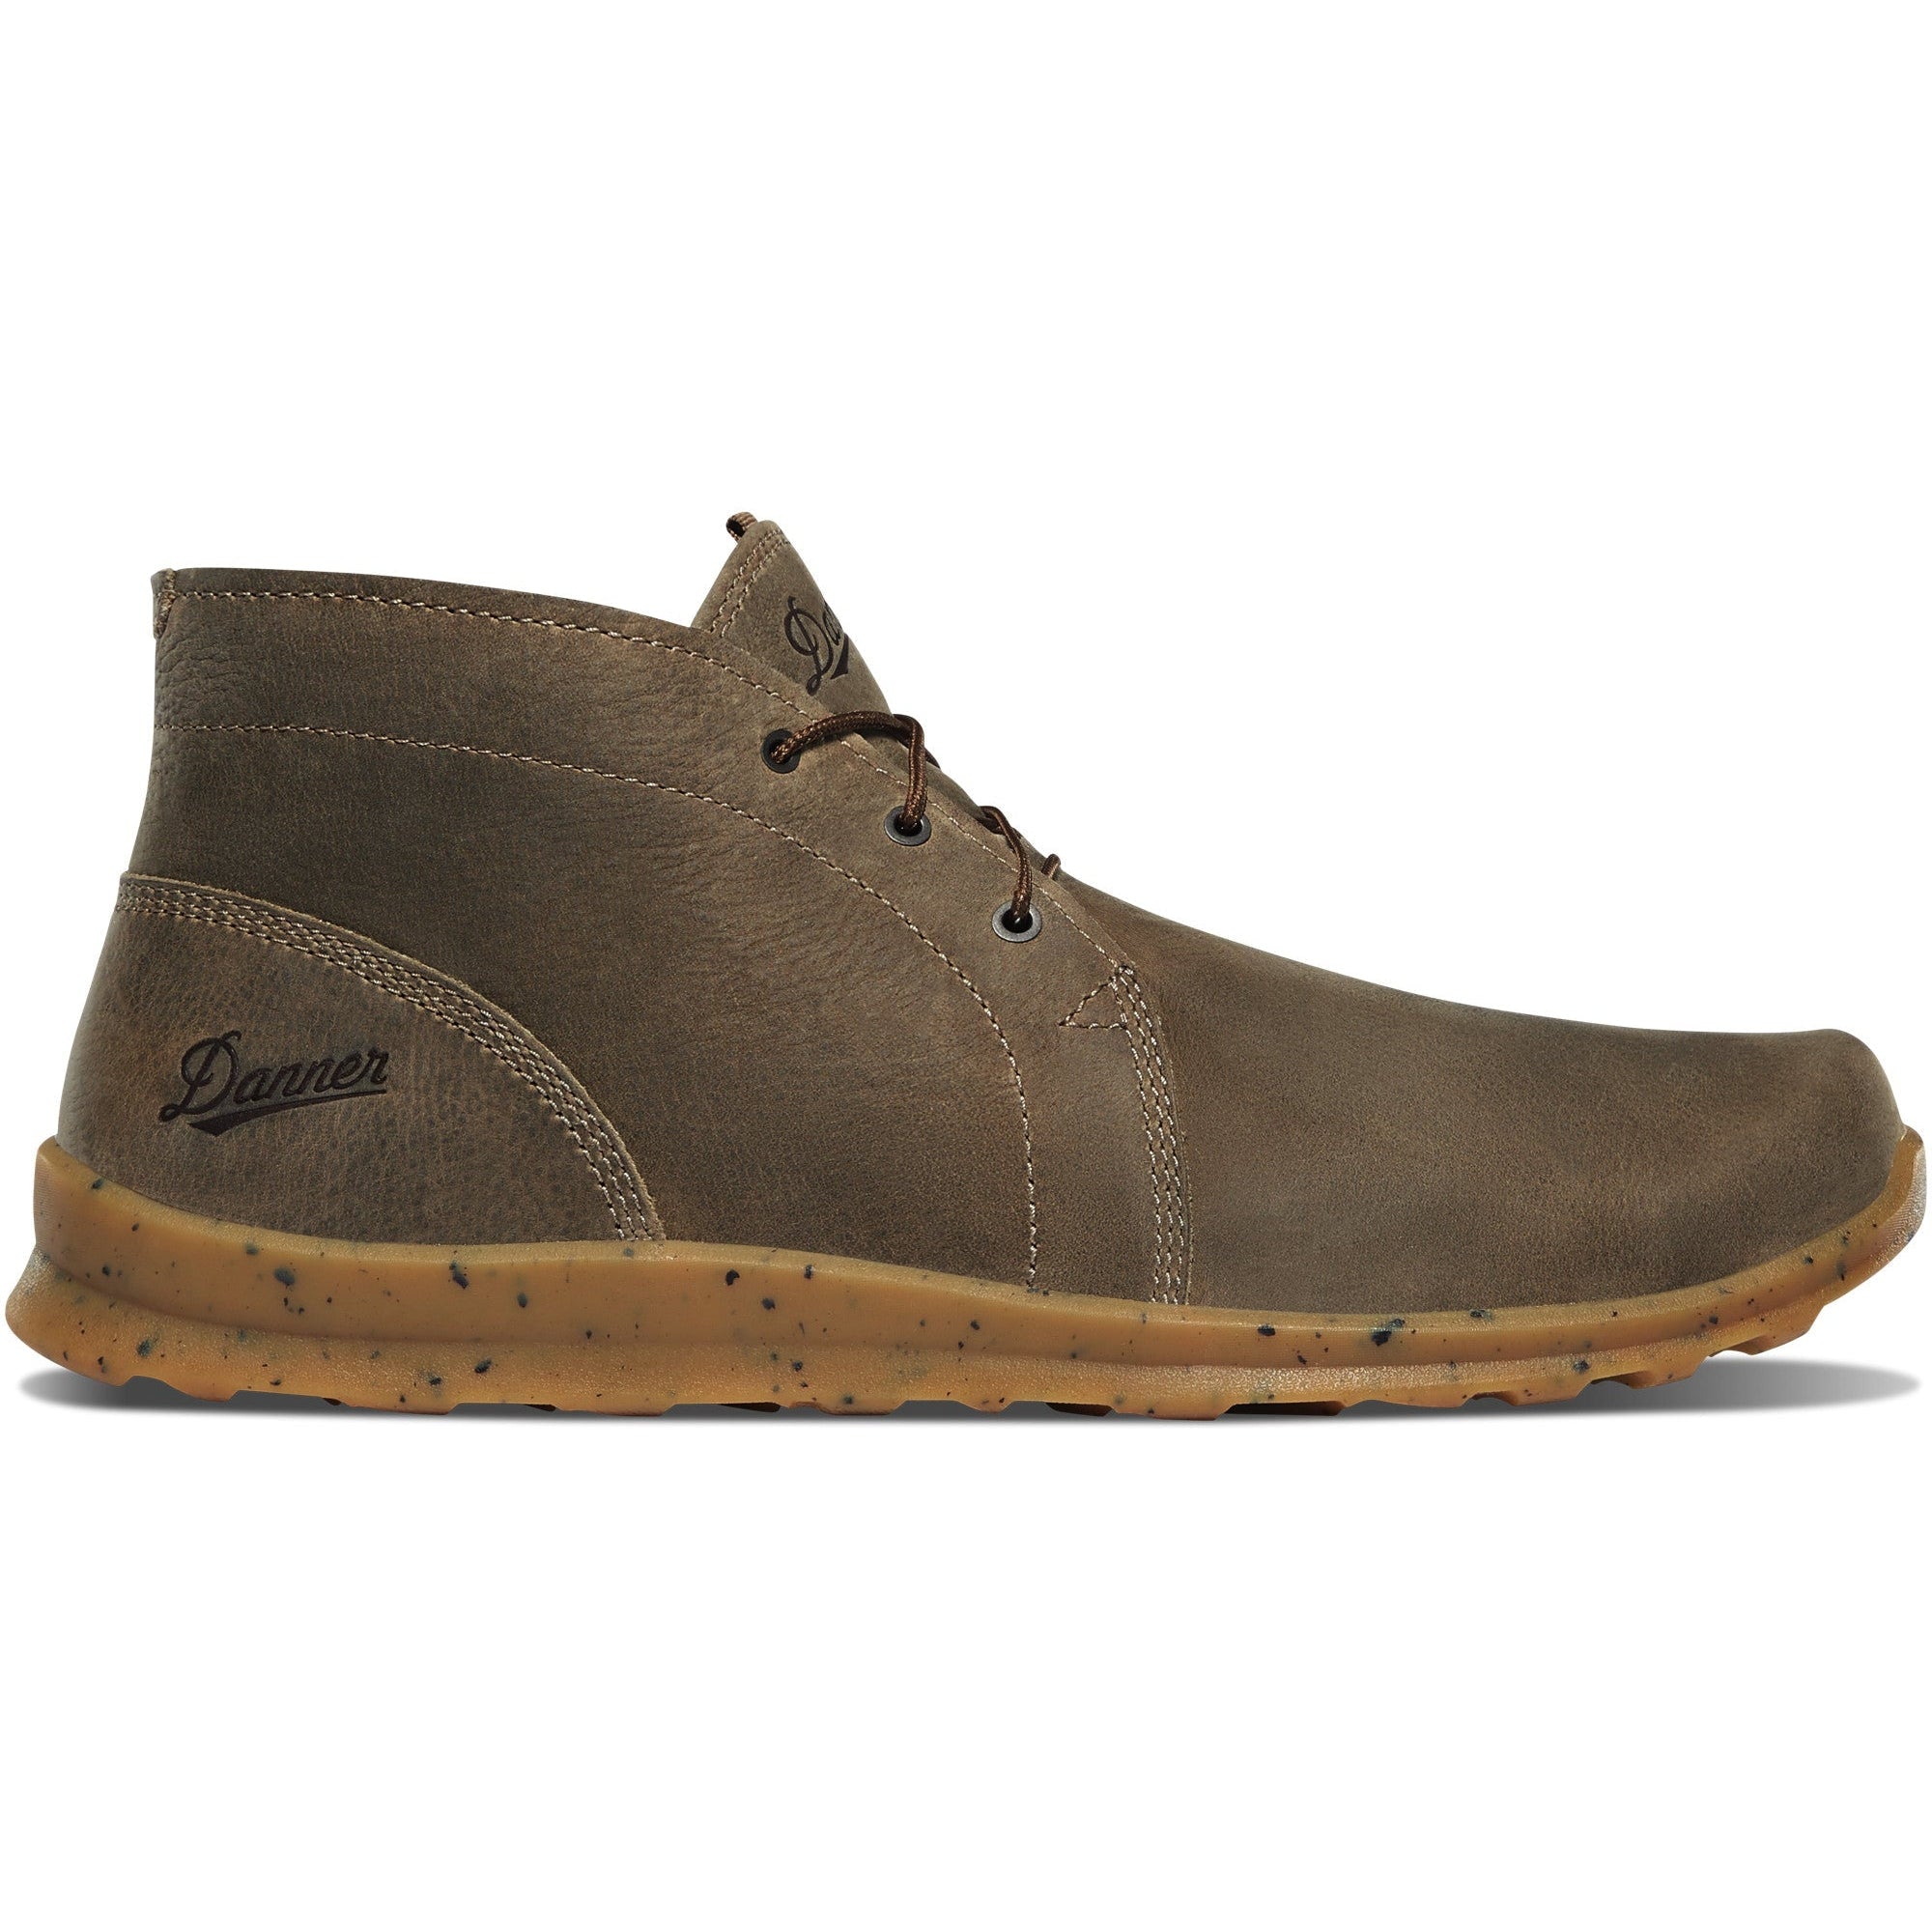 Danner Men's Forest Chukka 4.5" Leather Lifestyle Boot - 37640  - Overlook Boots